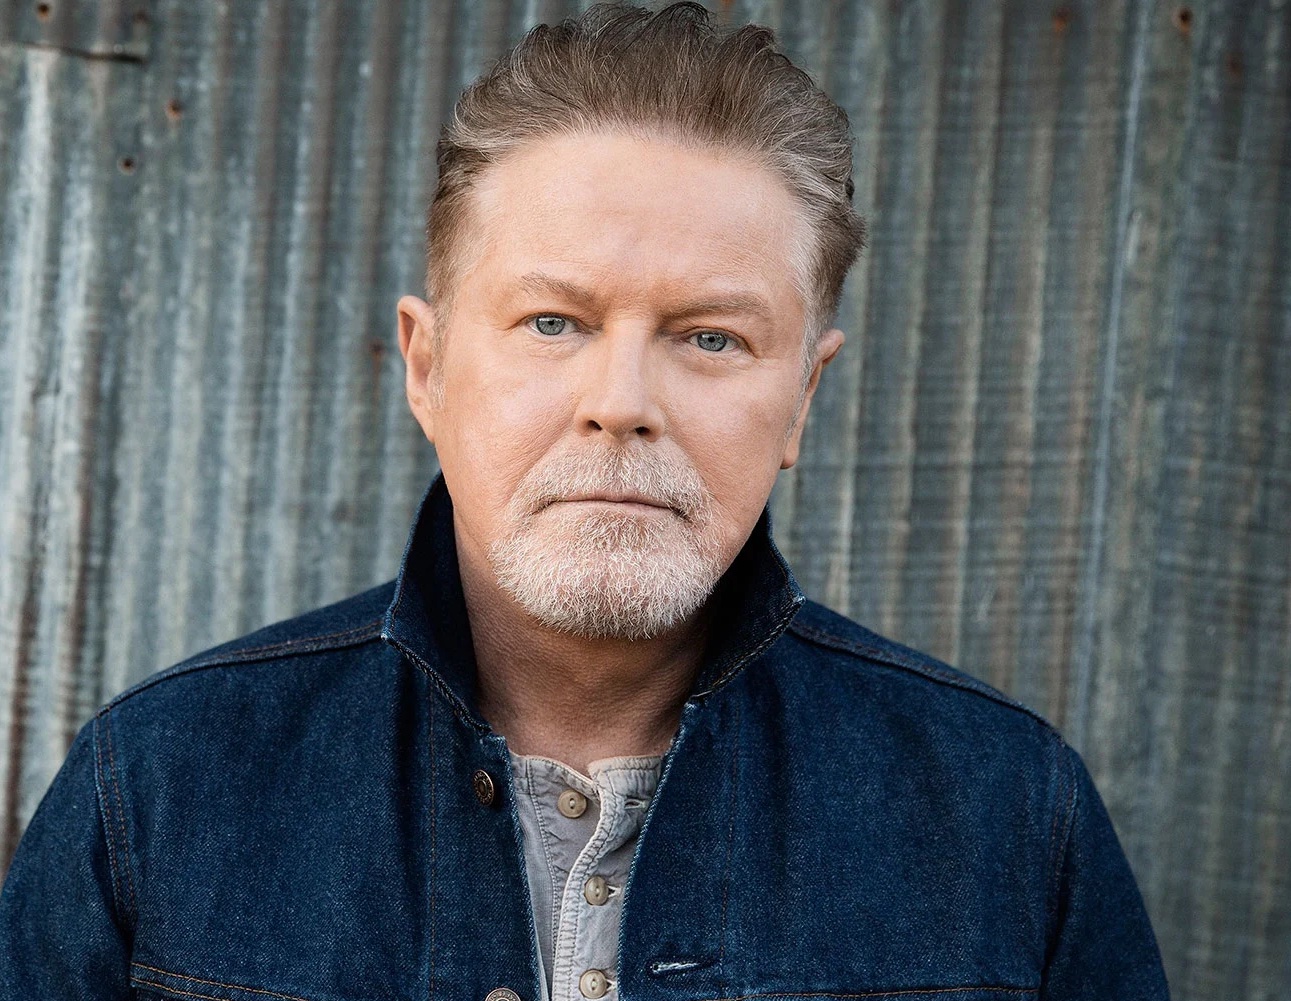 Famous people horrible actions - don henley